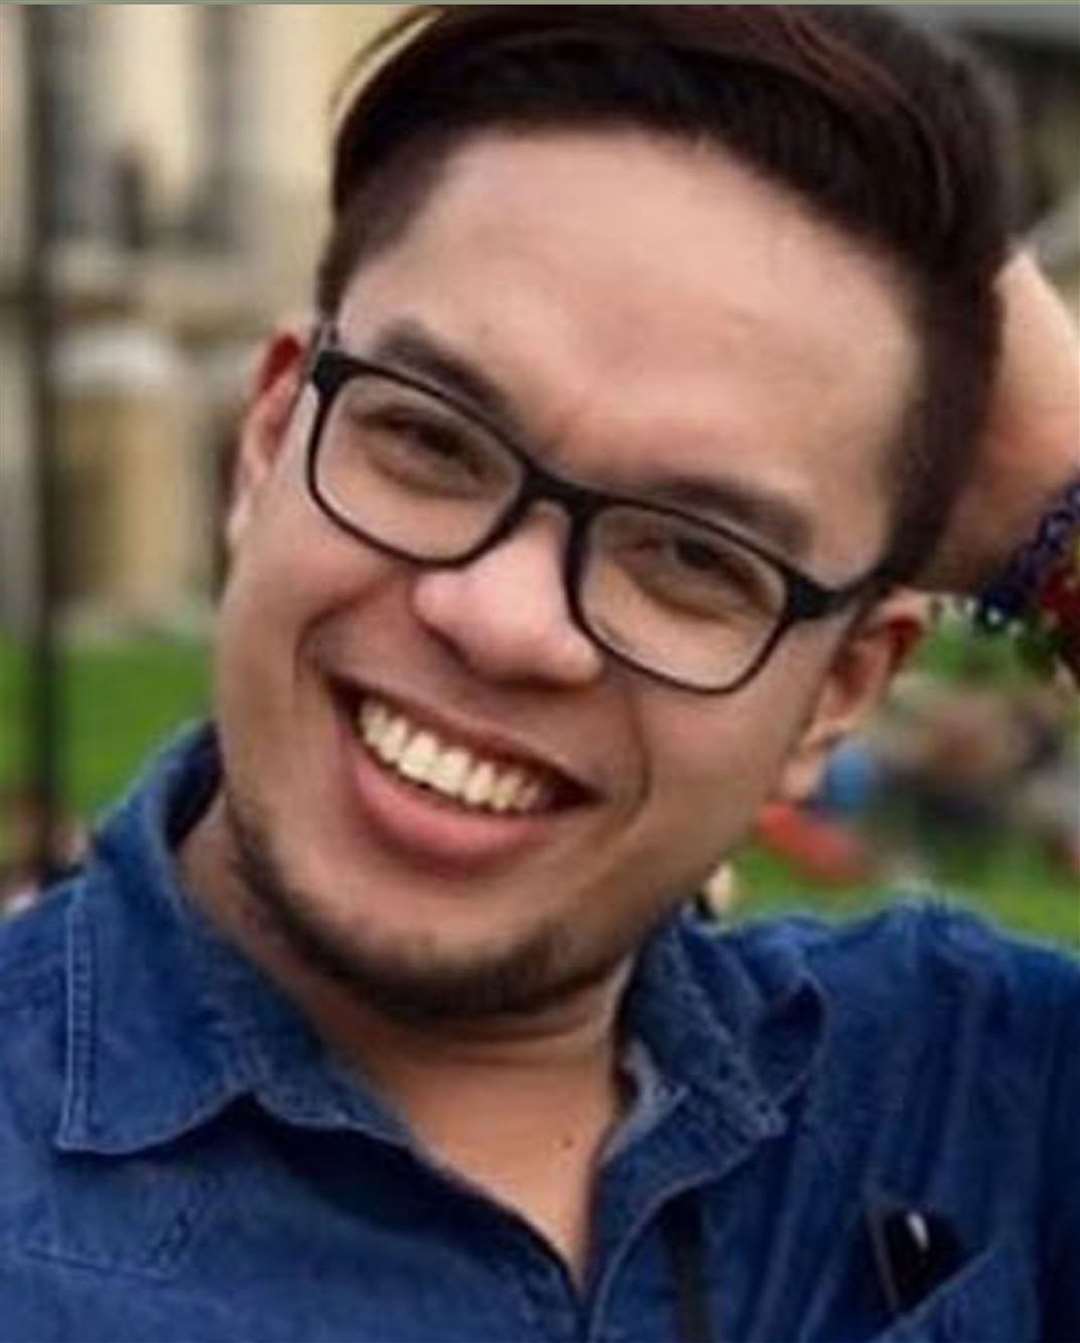 Also known as Ken, Kenneth Lambatan worked at St George’s Hospital (GoFundMe/PA)